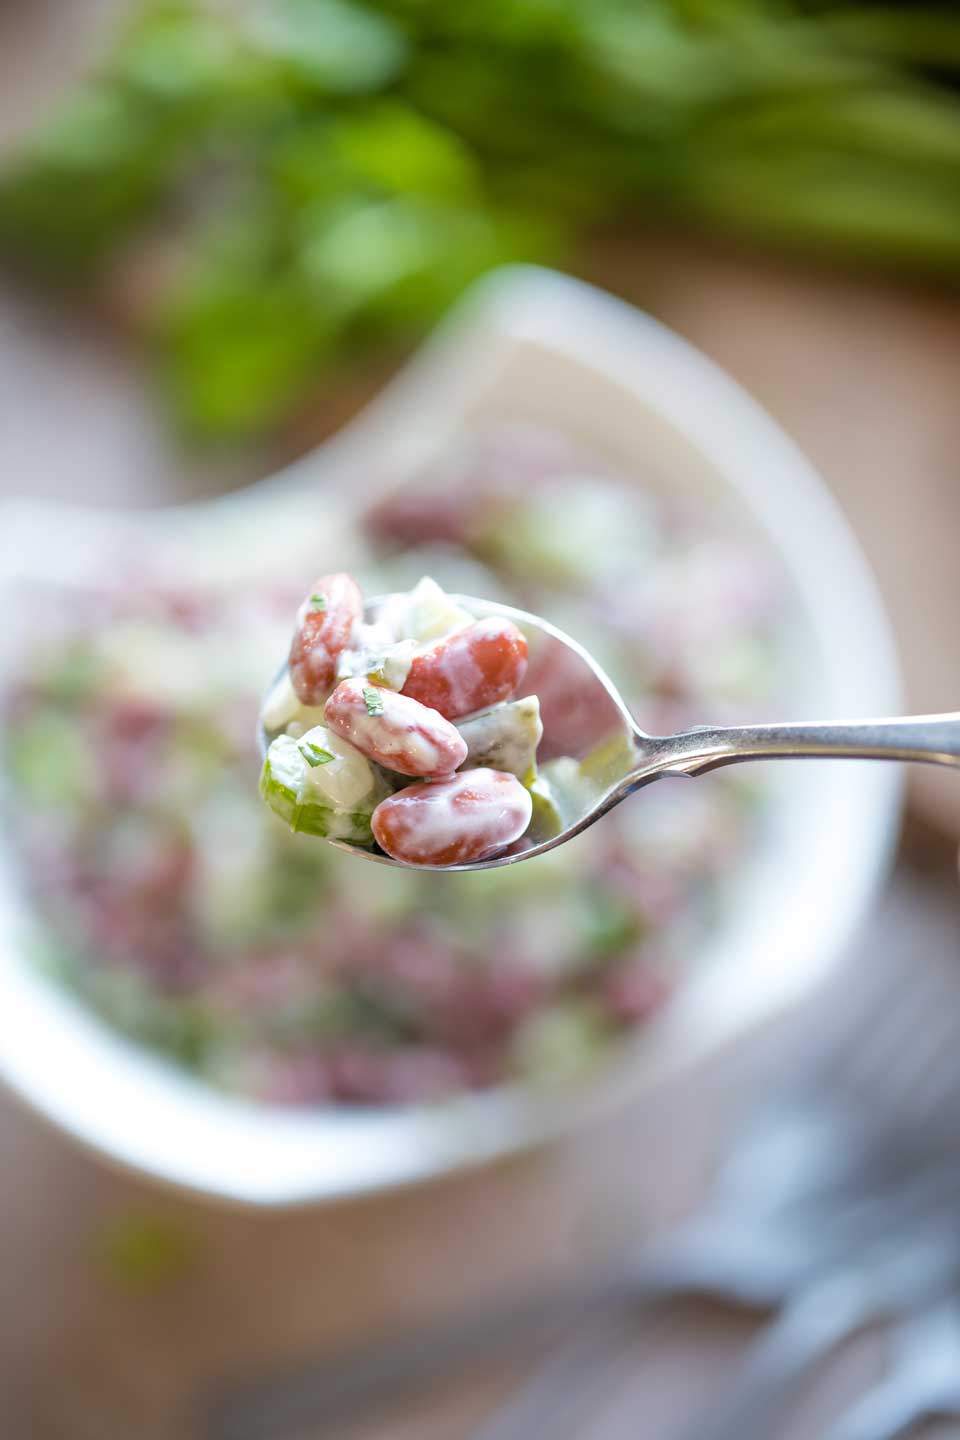 Closeup of a serving spoon holding a scoop of bean salad, with the rest of the serving bowl, some forks and celery stalks blurred out below.